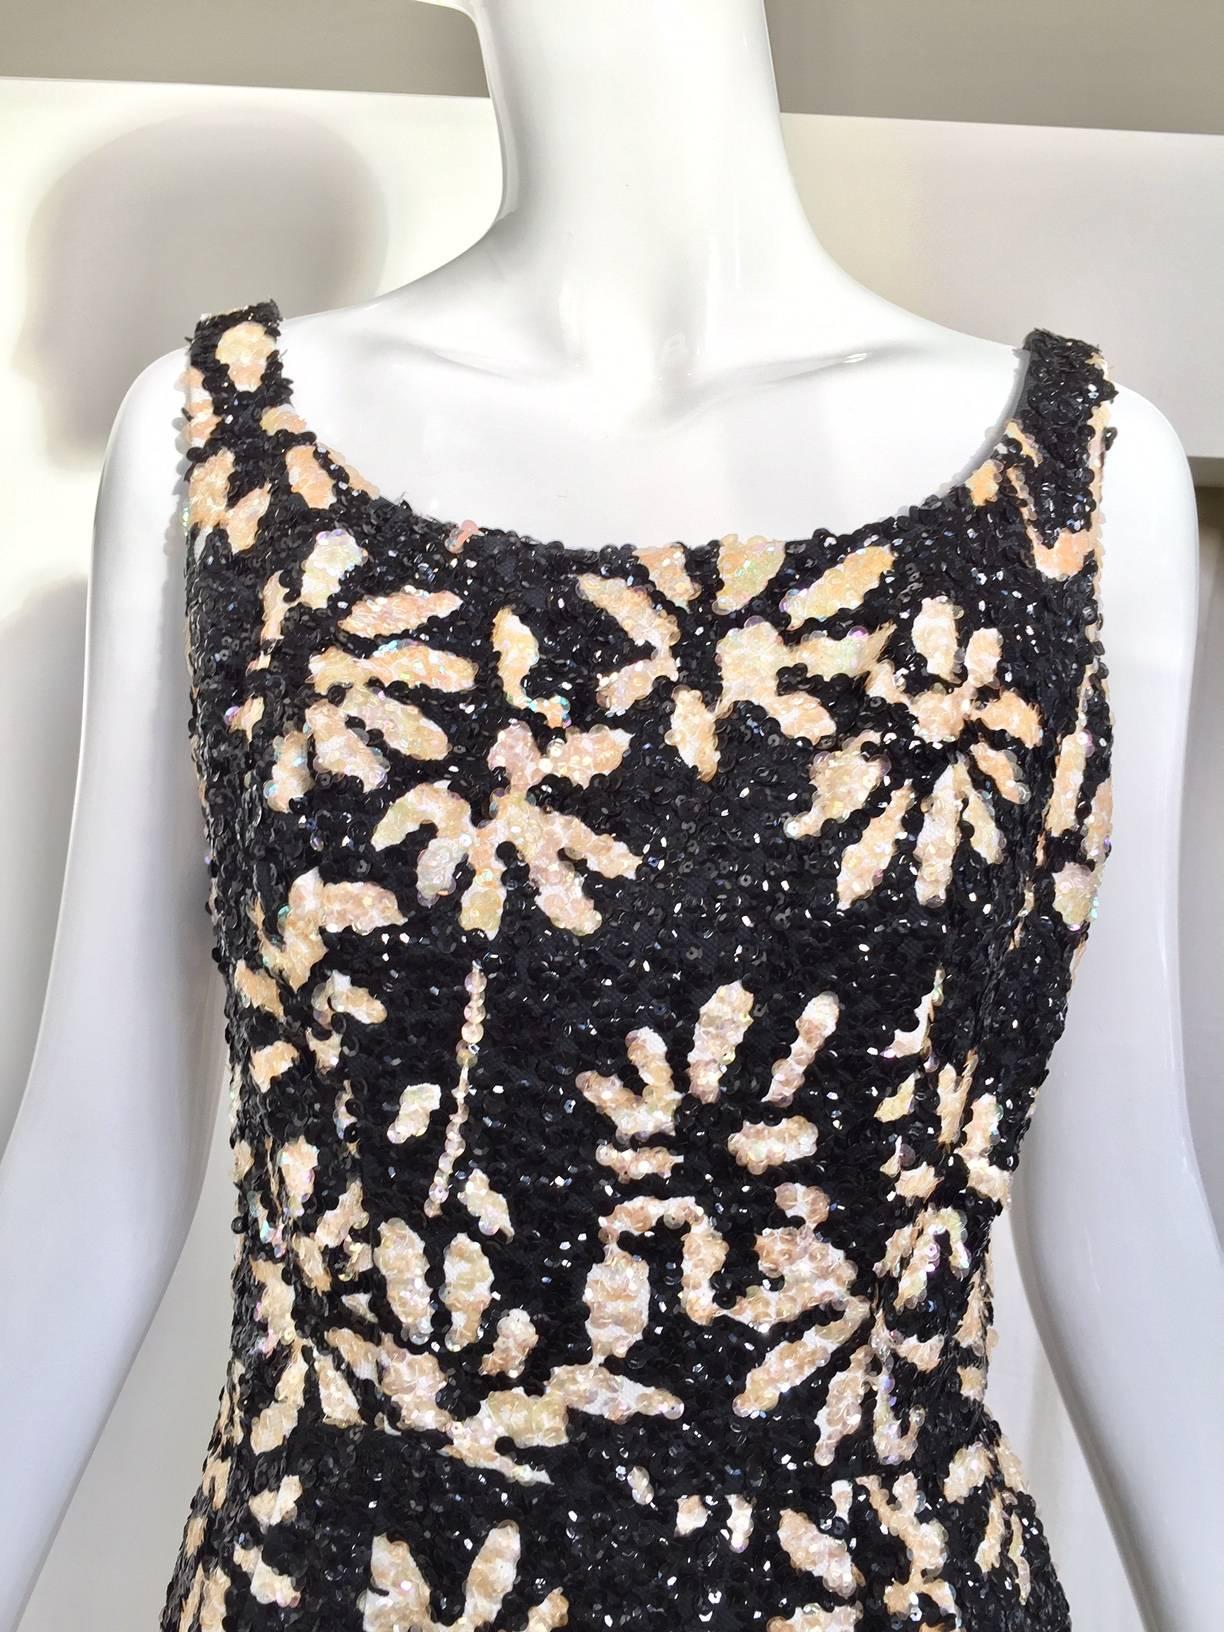 Late 60s Black and white floral pattern sequin wiggle dress.  The actual sequin color is almost pale pink. Perfect cocktail party dress
Bust: 36